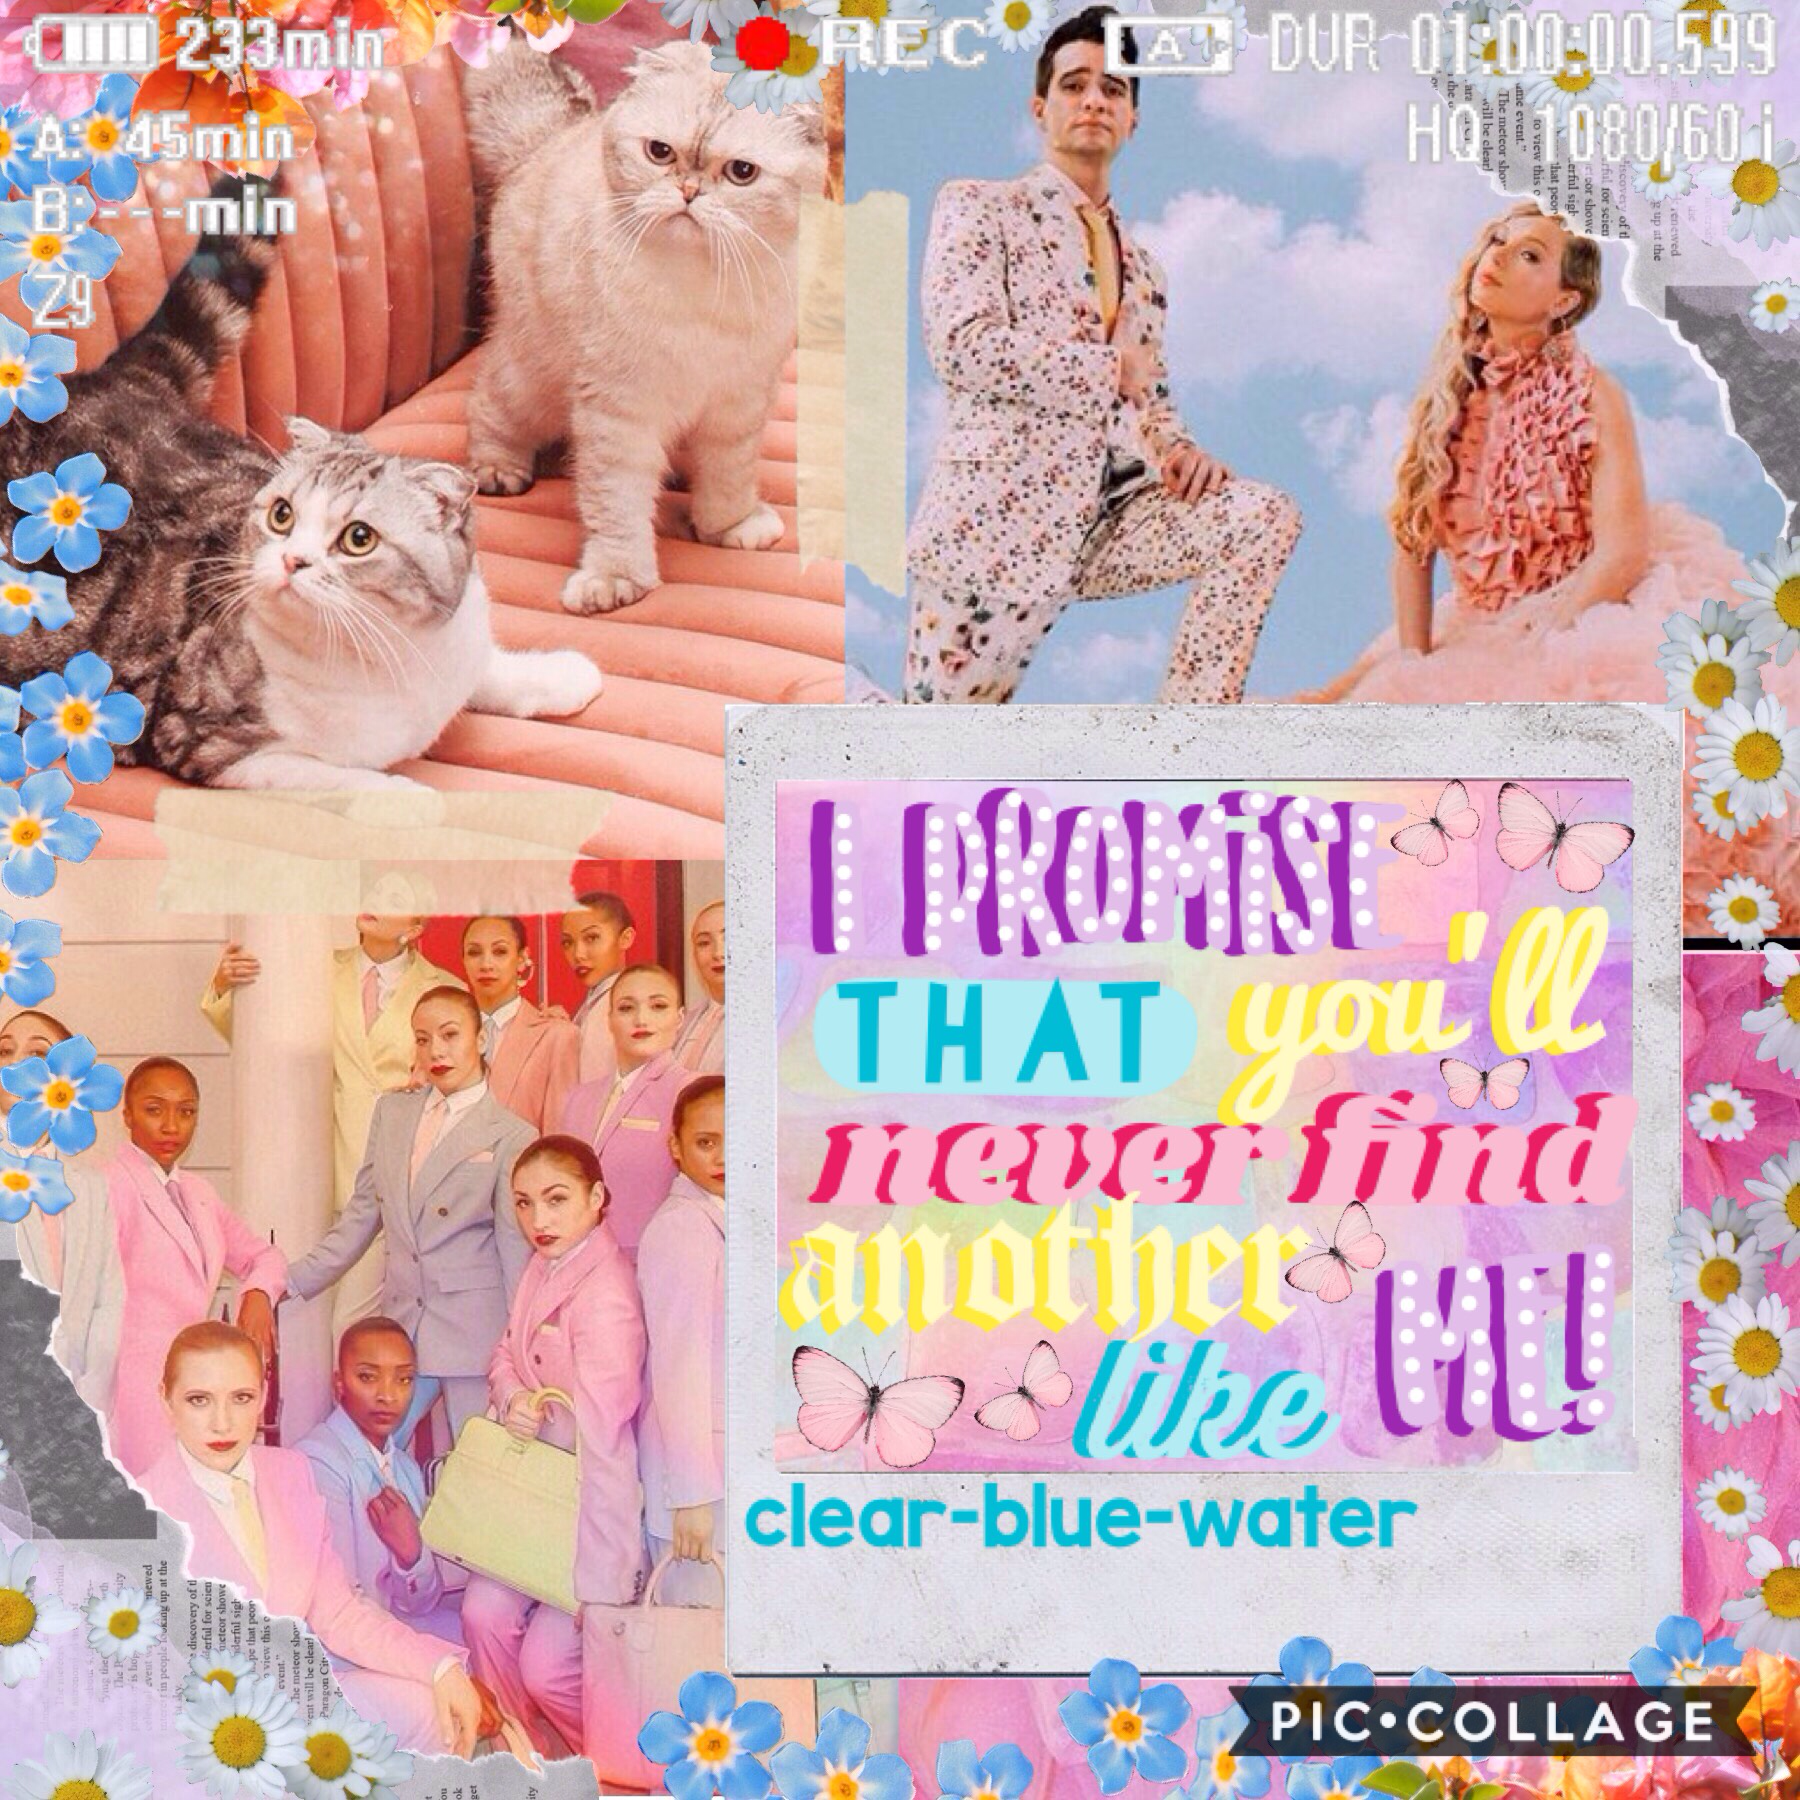 💖T A P💖
Love this song sm!!
QOTD: Which one of Taylor's cats is your favorite
AOTD: I love all of them but Benjamin is so cute 